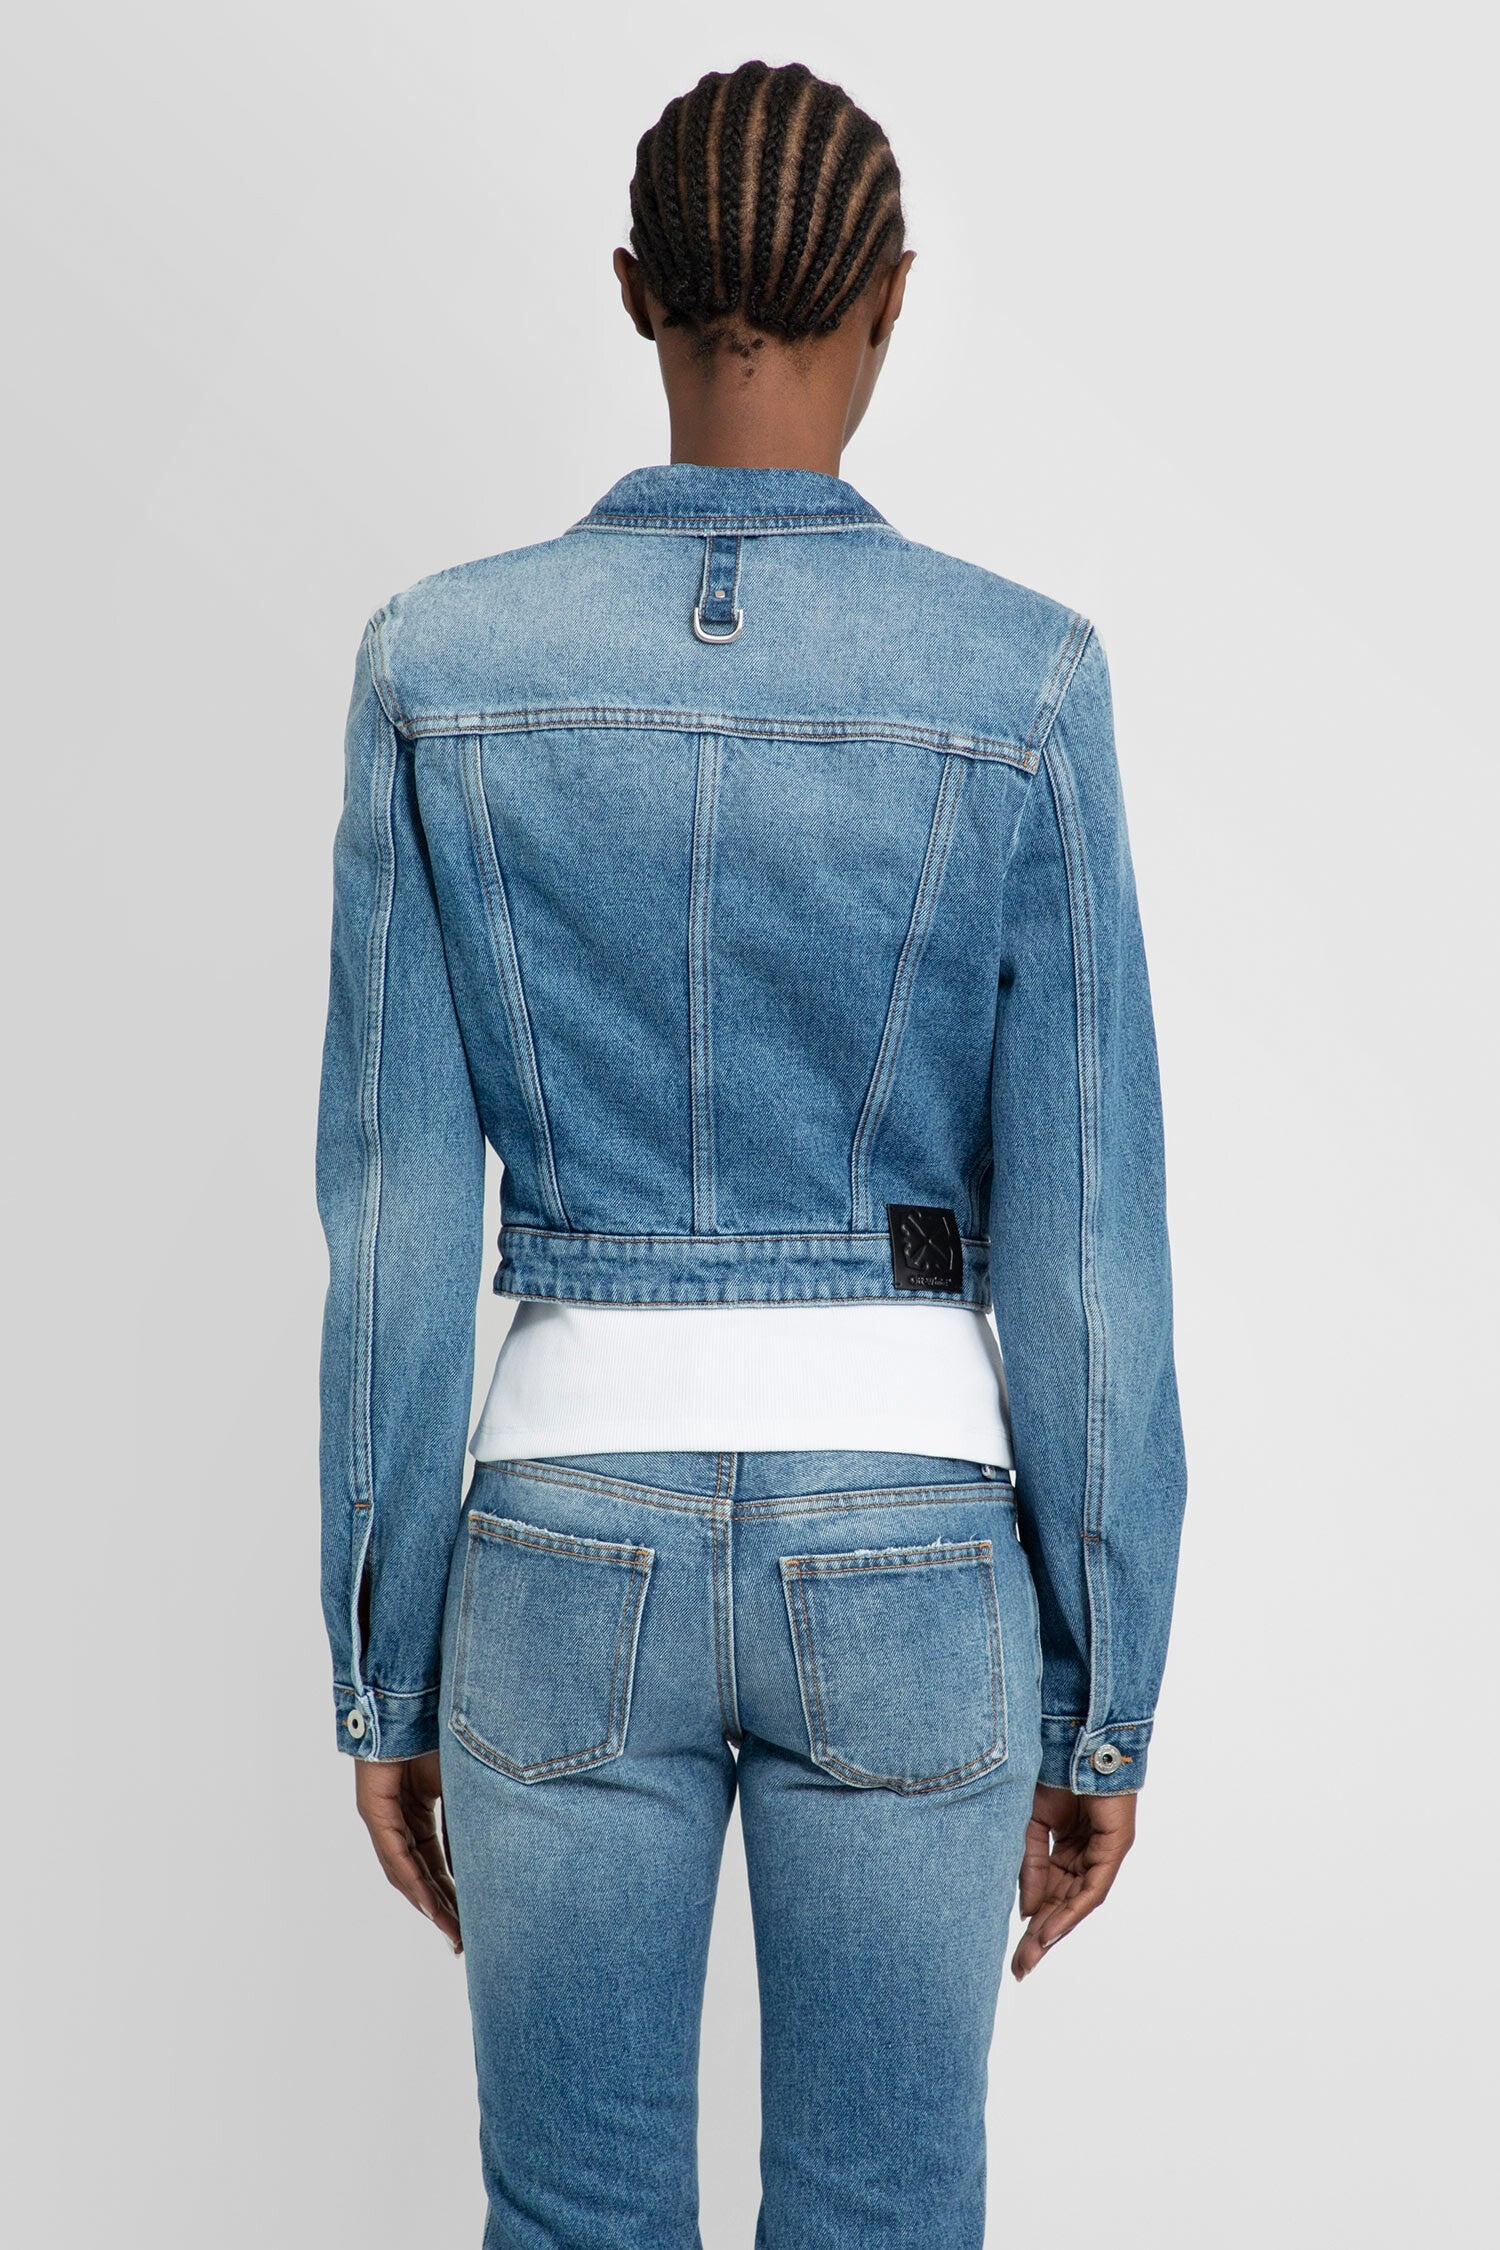 OFF-WHITE WOMAN BLUE JACKETS - 4